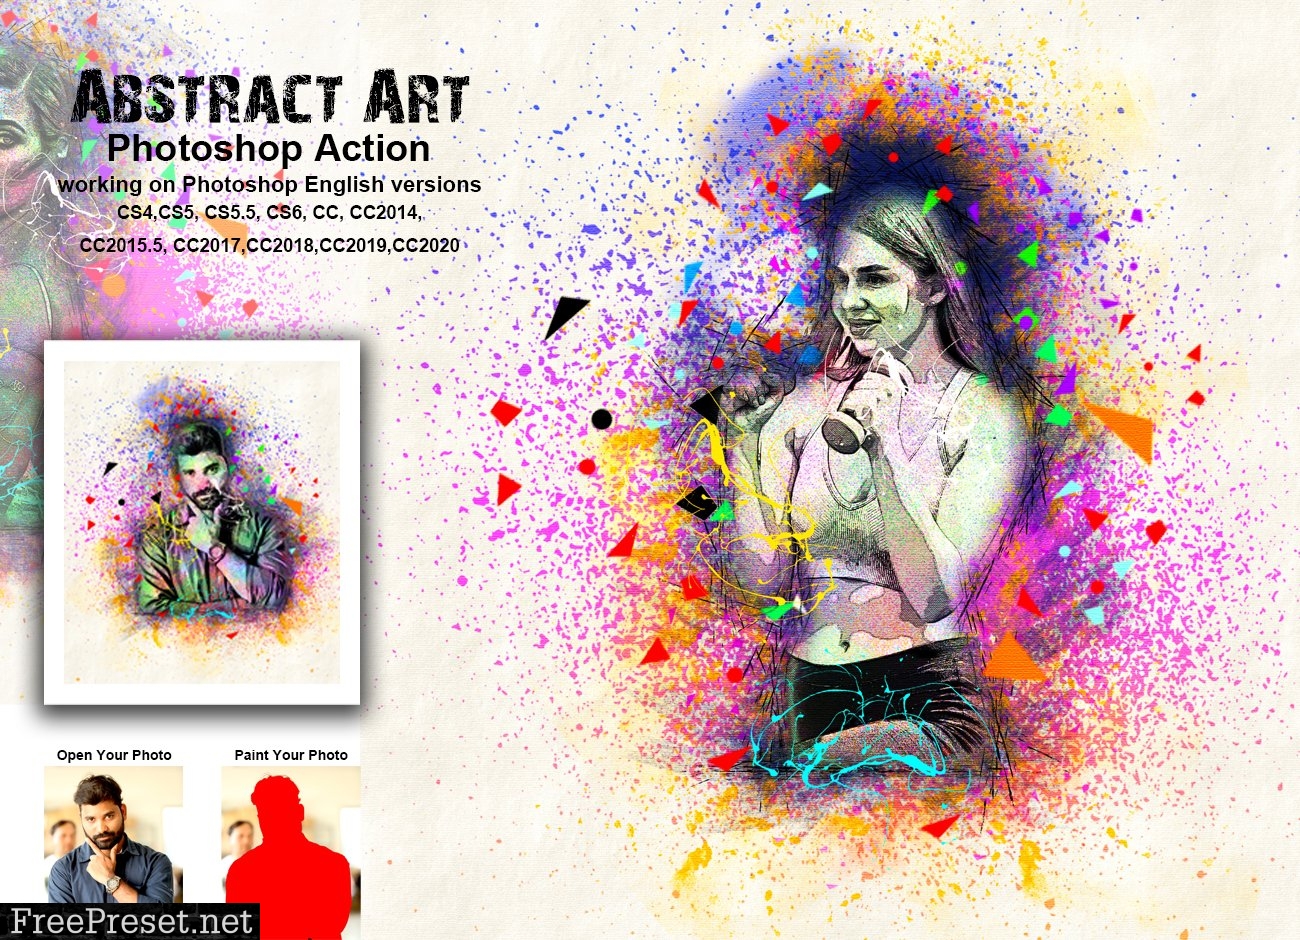 Abstract Art Photoshop Action 5480258